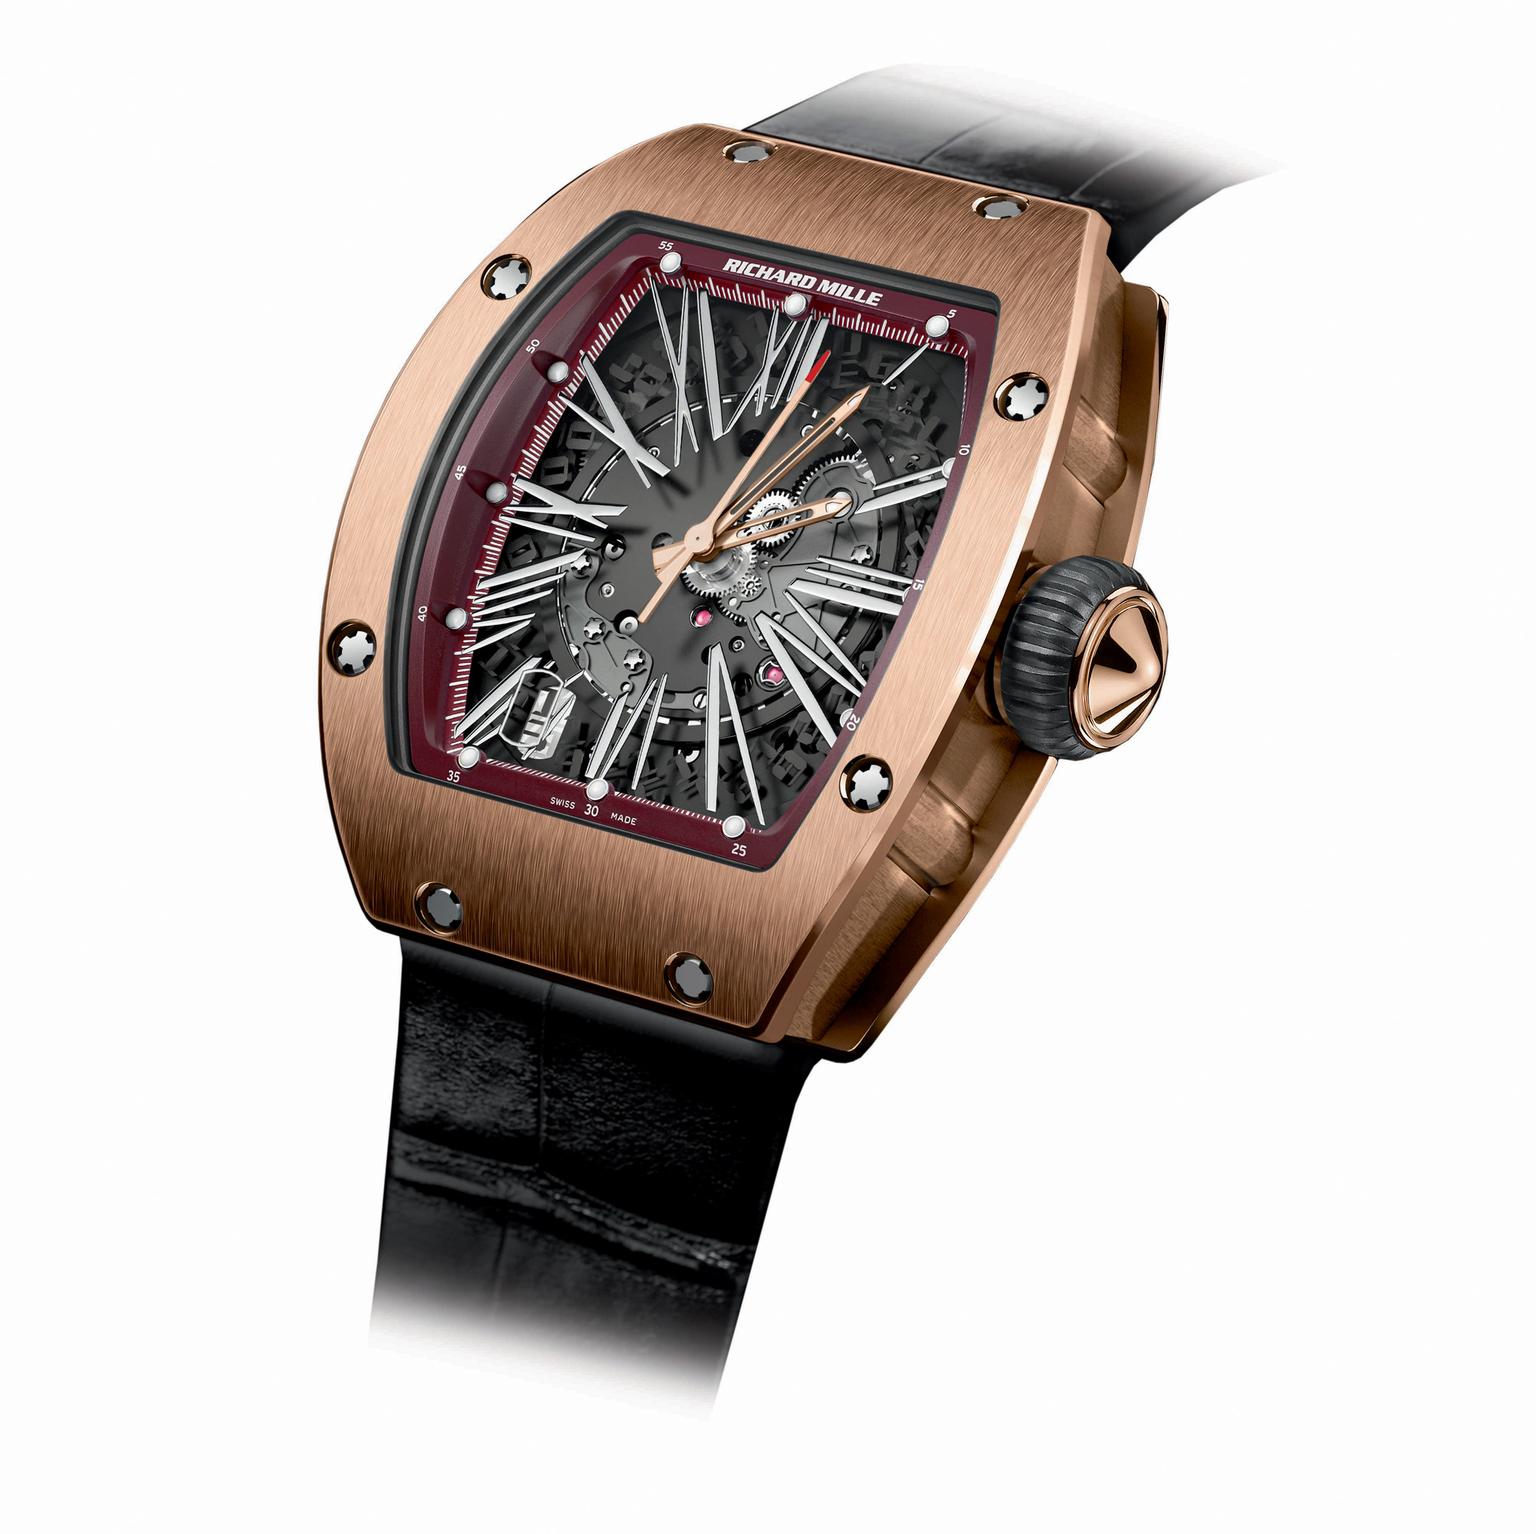 Richard Mille RM 023 in red gold_20131127_Zoom